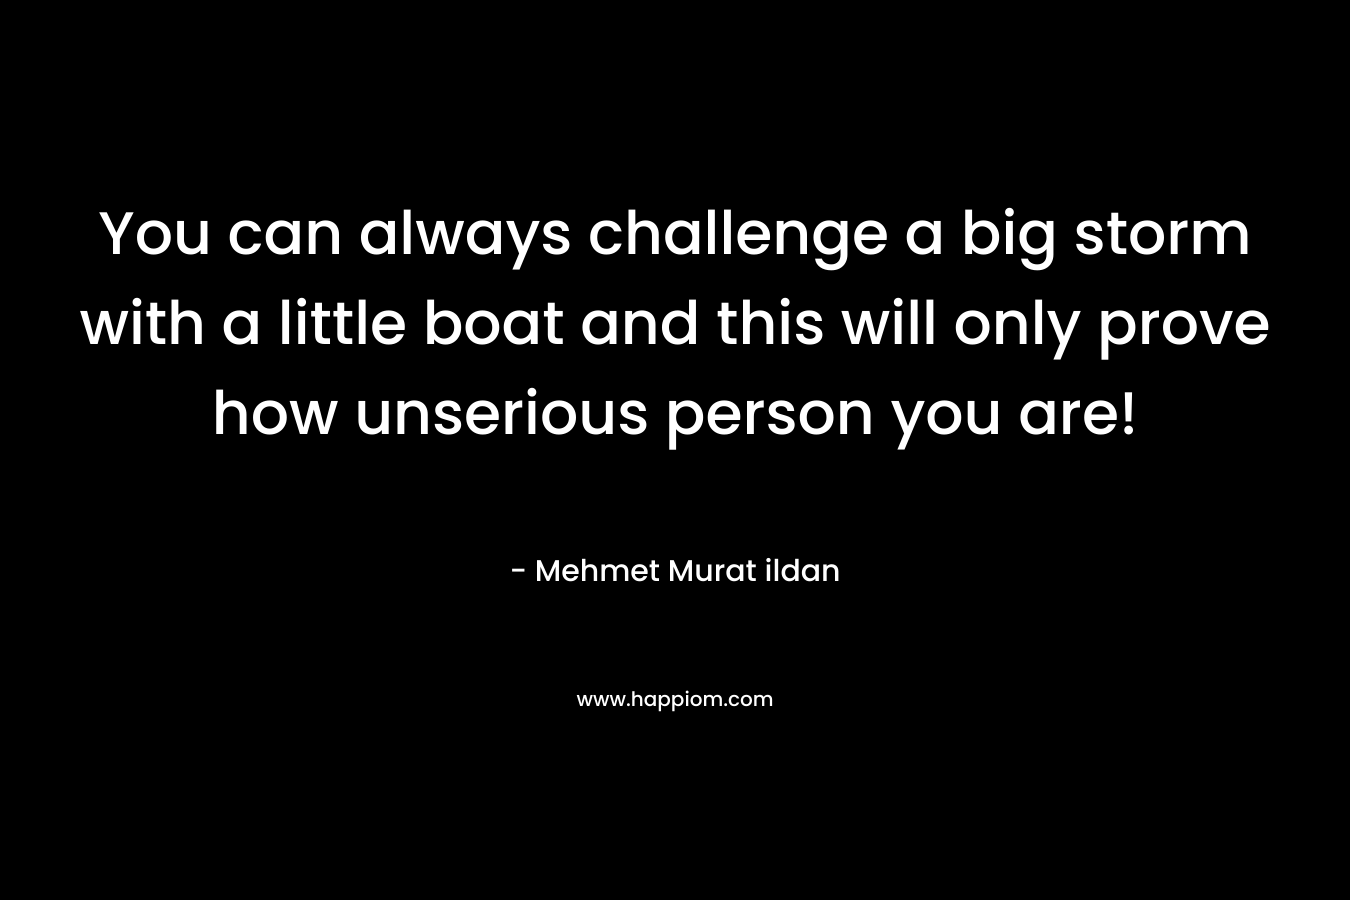 You can always challenge a big storm with a little boat and this will only prove how unserious person you are! – Mehmet Murat ildan